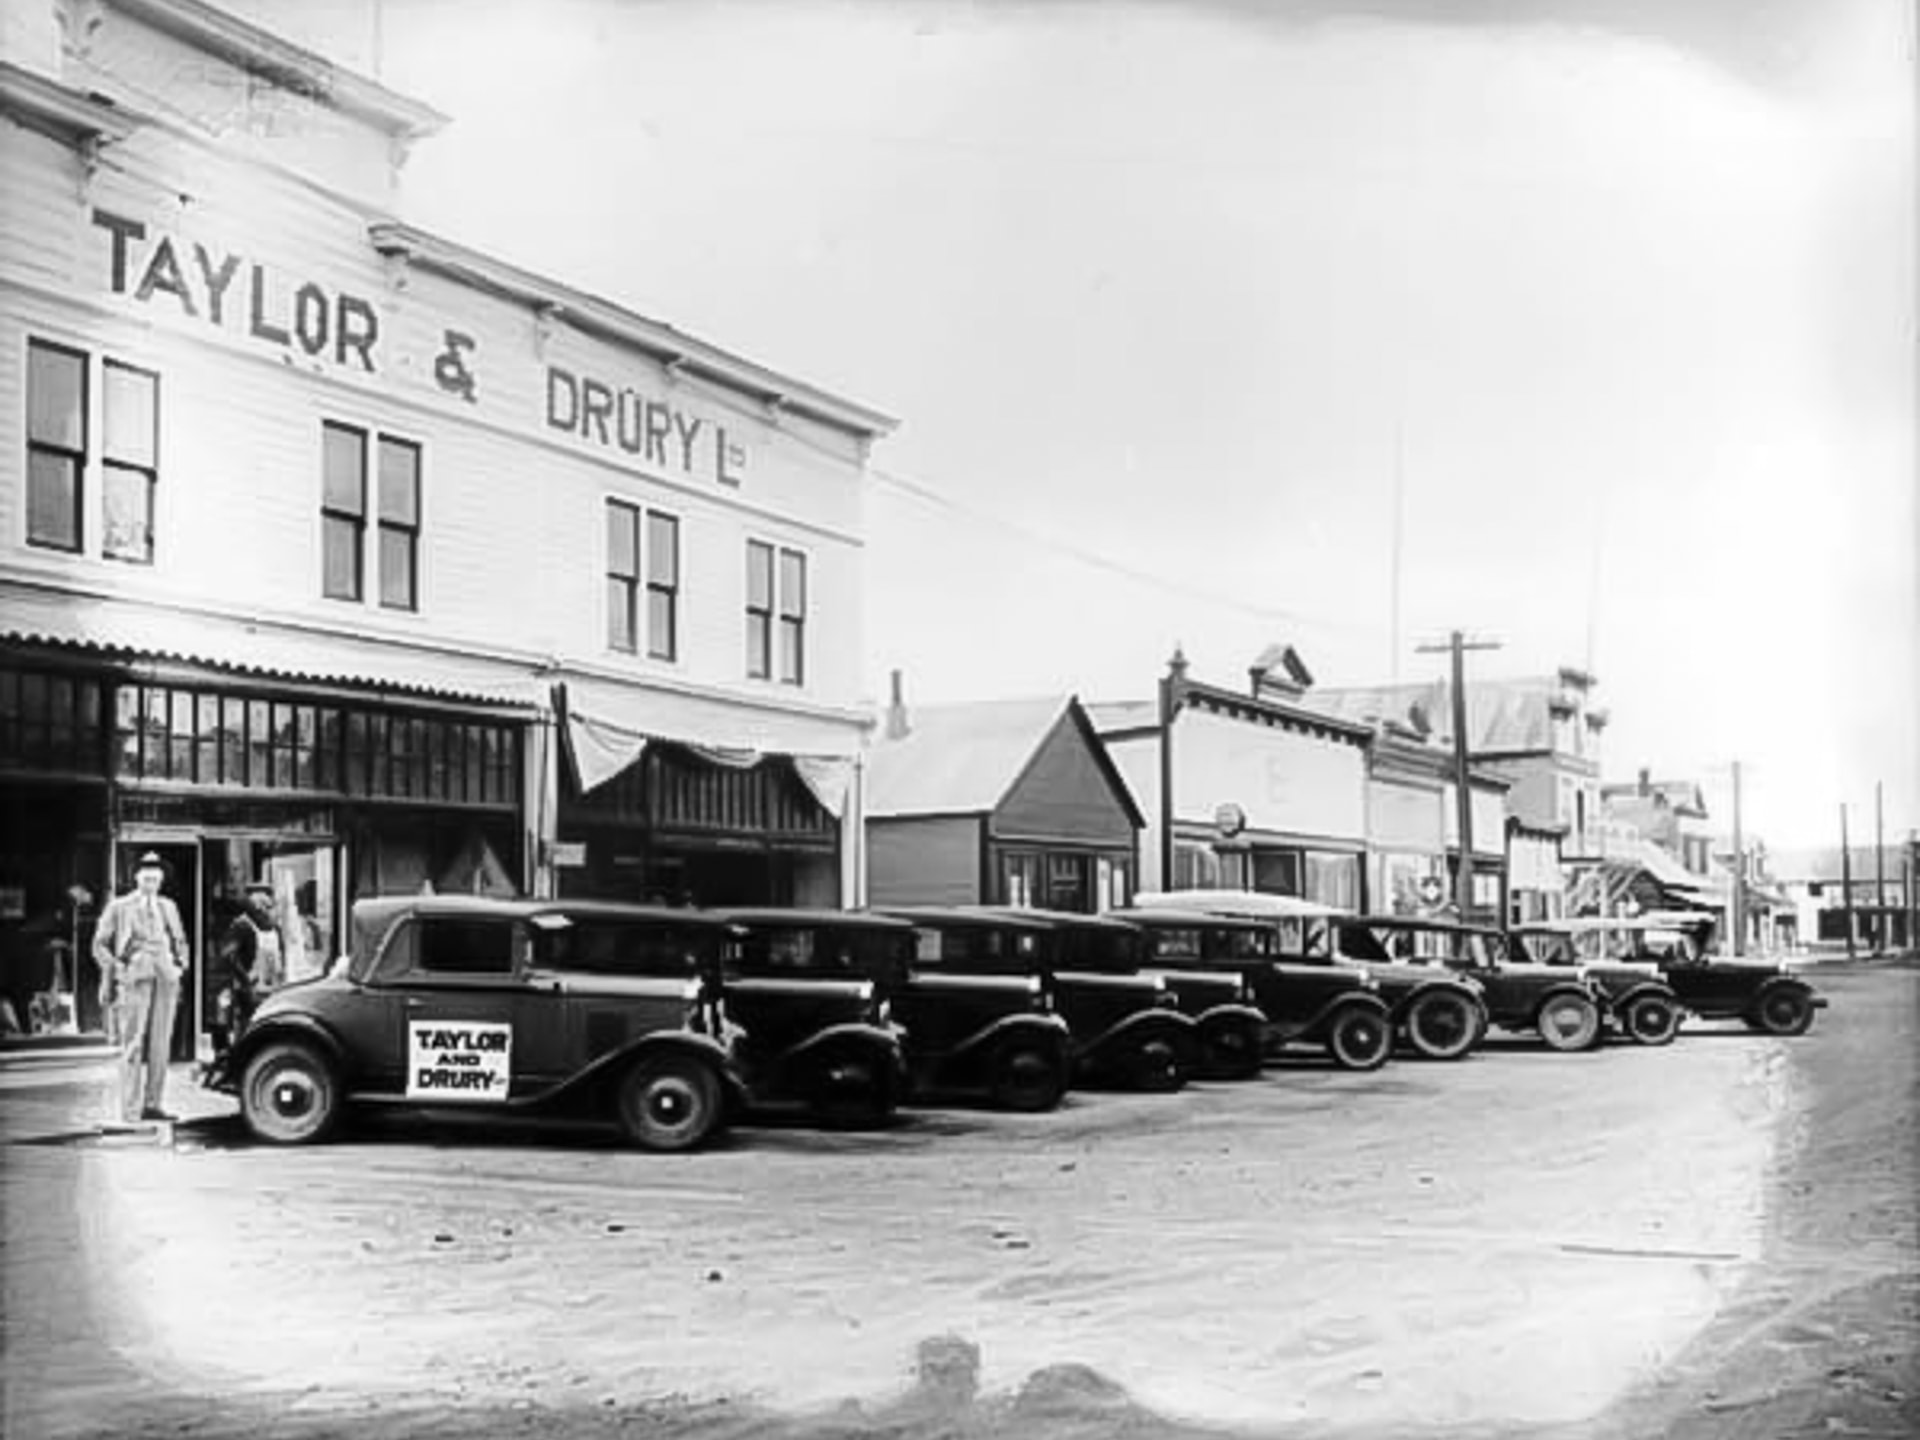 Cars for sale outside Taylor and Drury Store in Whitehorse 1928